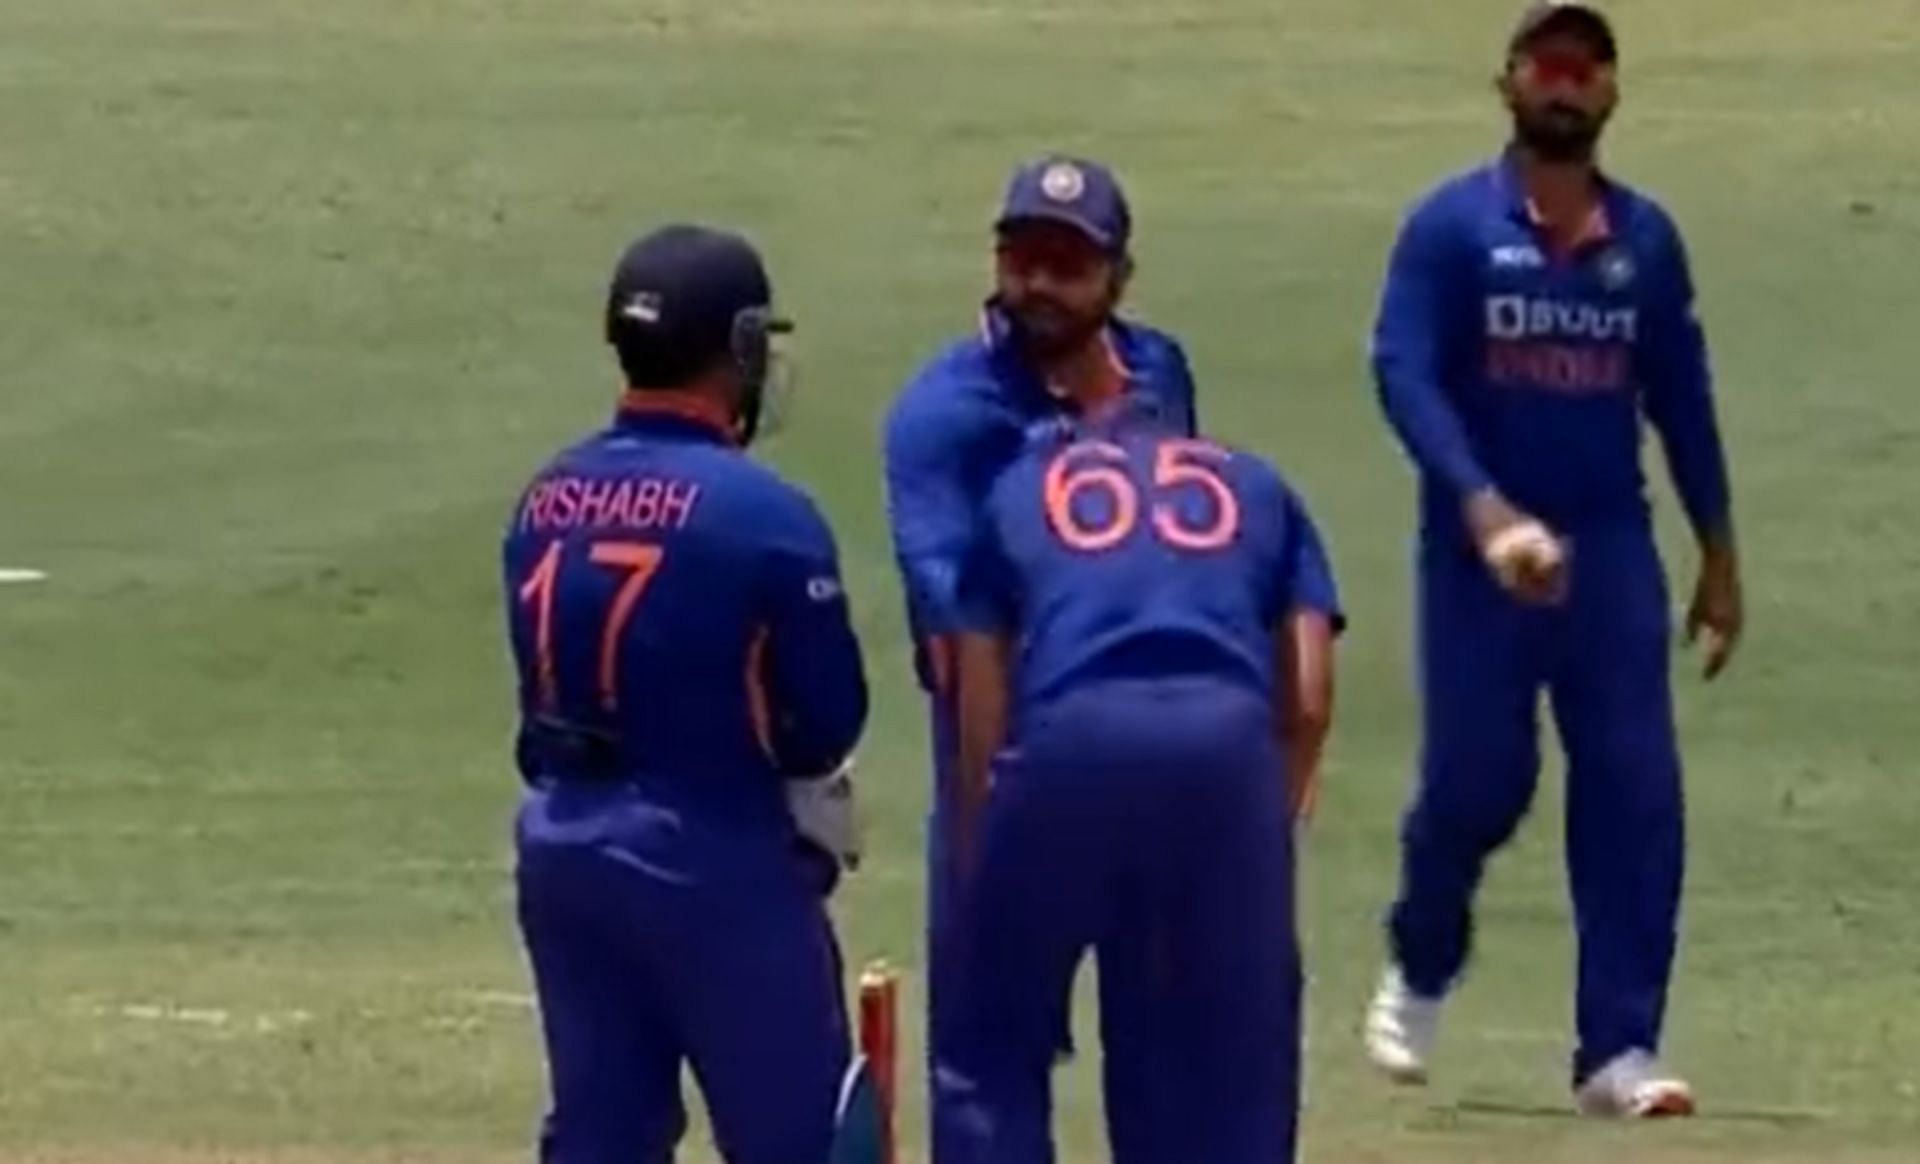 Rishabh Pant has at times left his team flustered over his choices